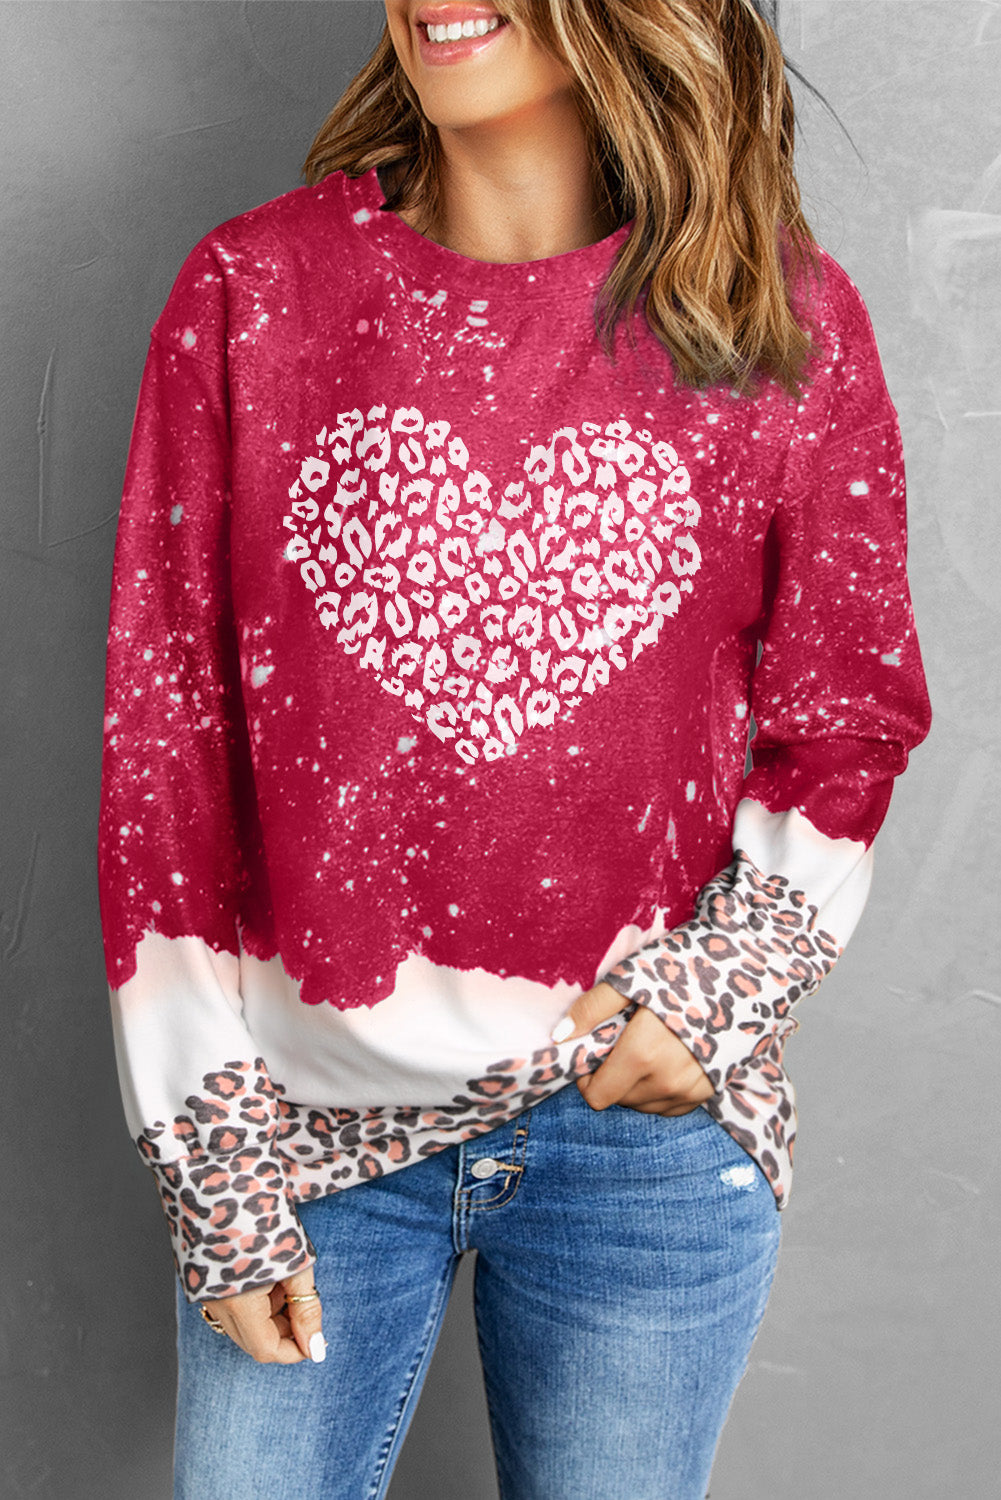 Red Leopard Bleached Heart Print Graphic Pullover Sweatshirt